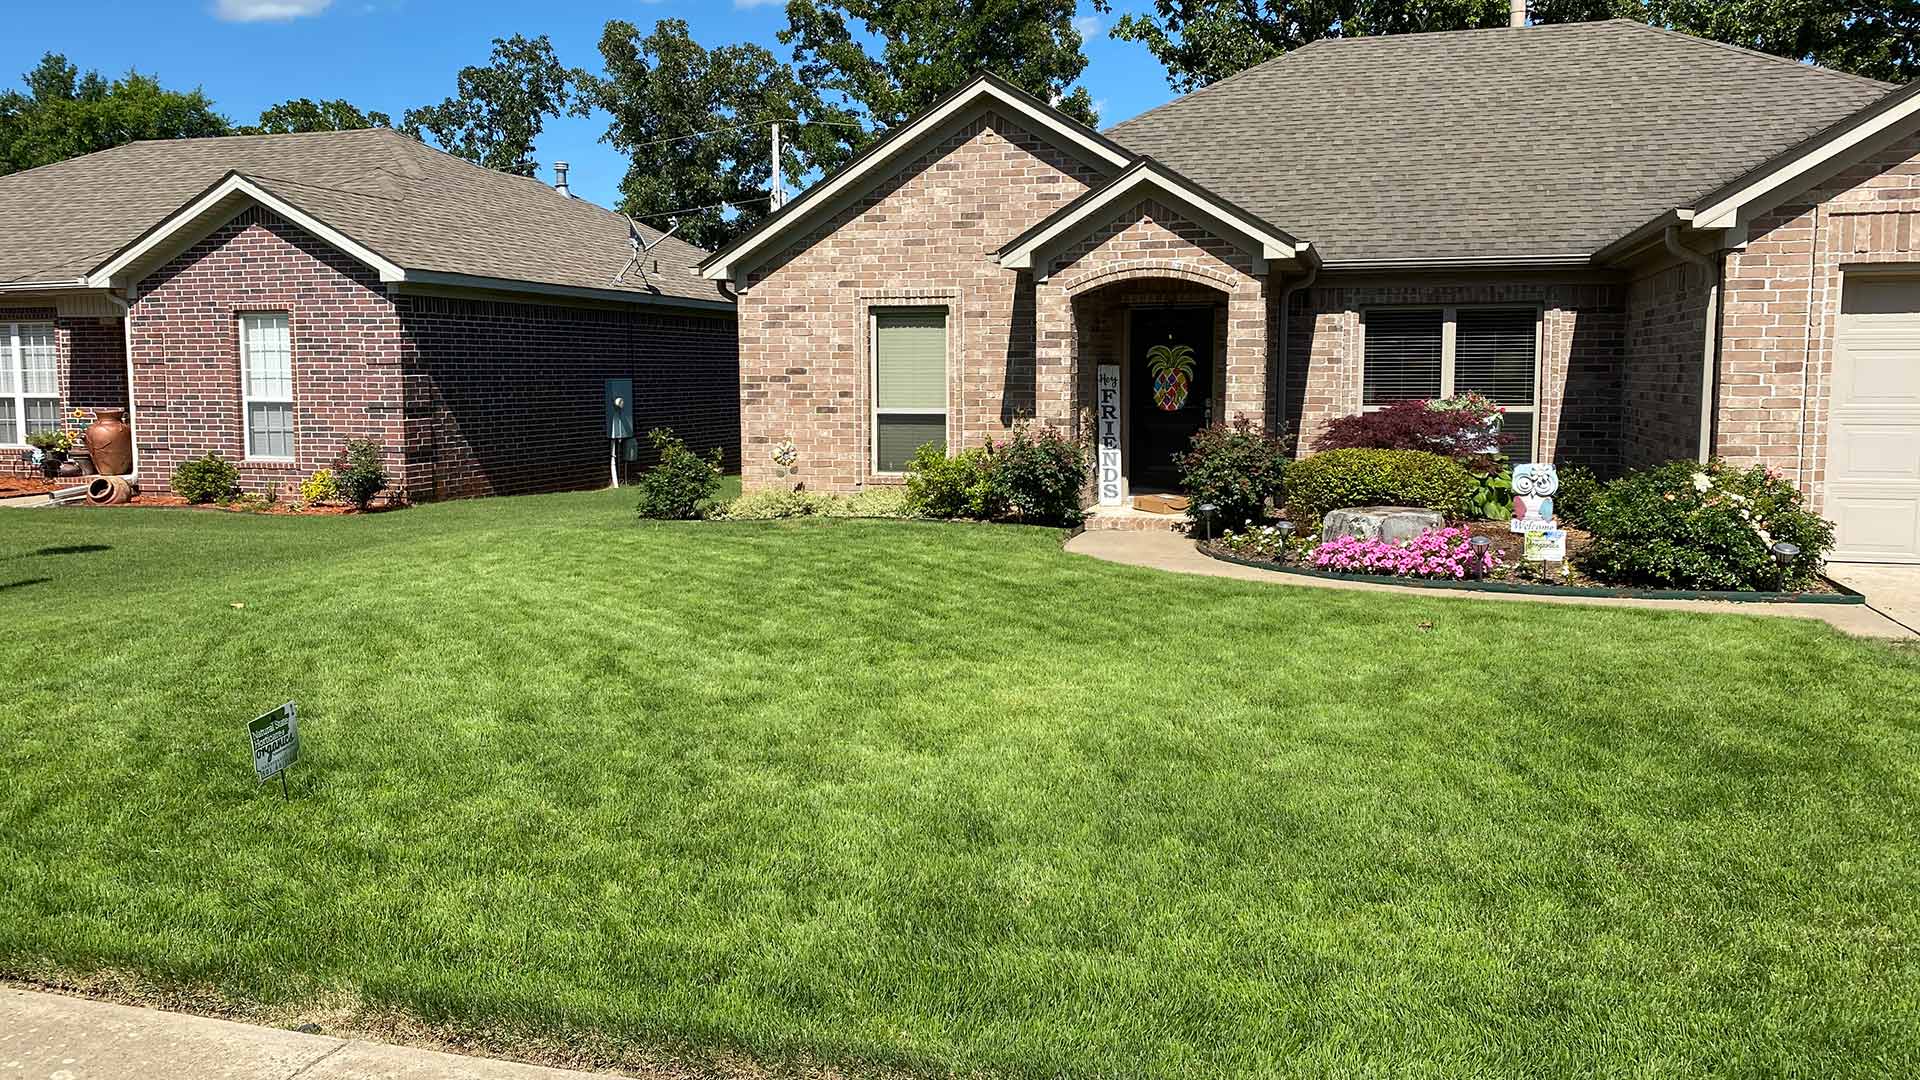 Weed-free yard at a home in North Little Rock, AR.